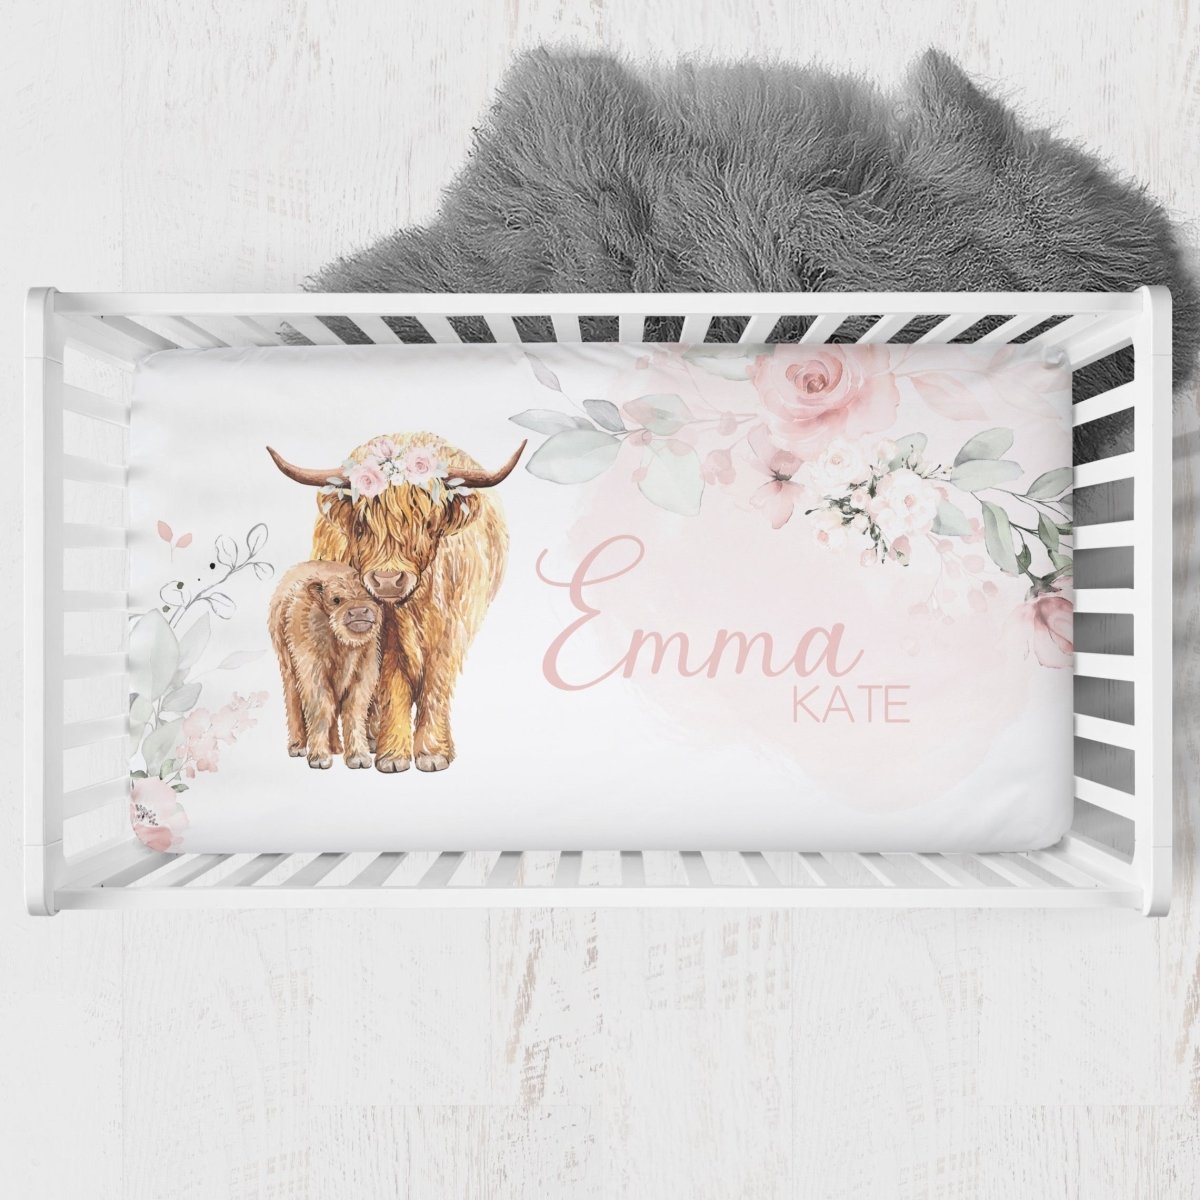 Highland Cow Floral Personalized Crib Sheet - gender_girl, Personalized_Yes, text